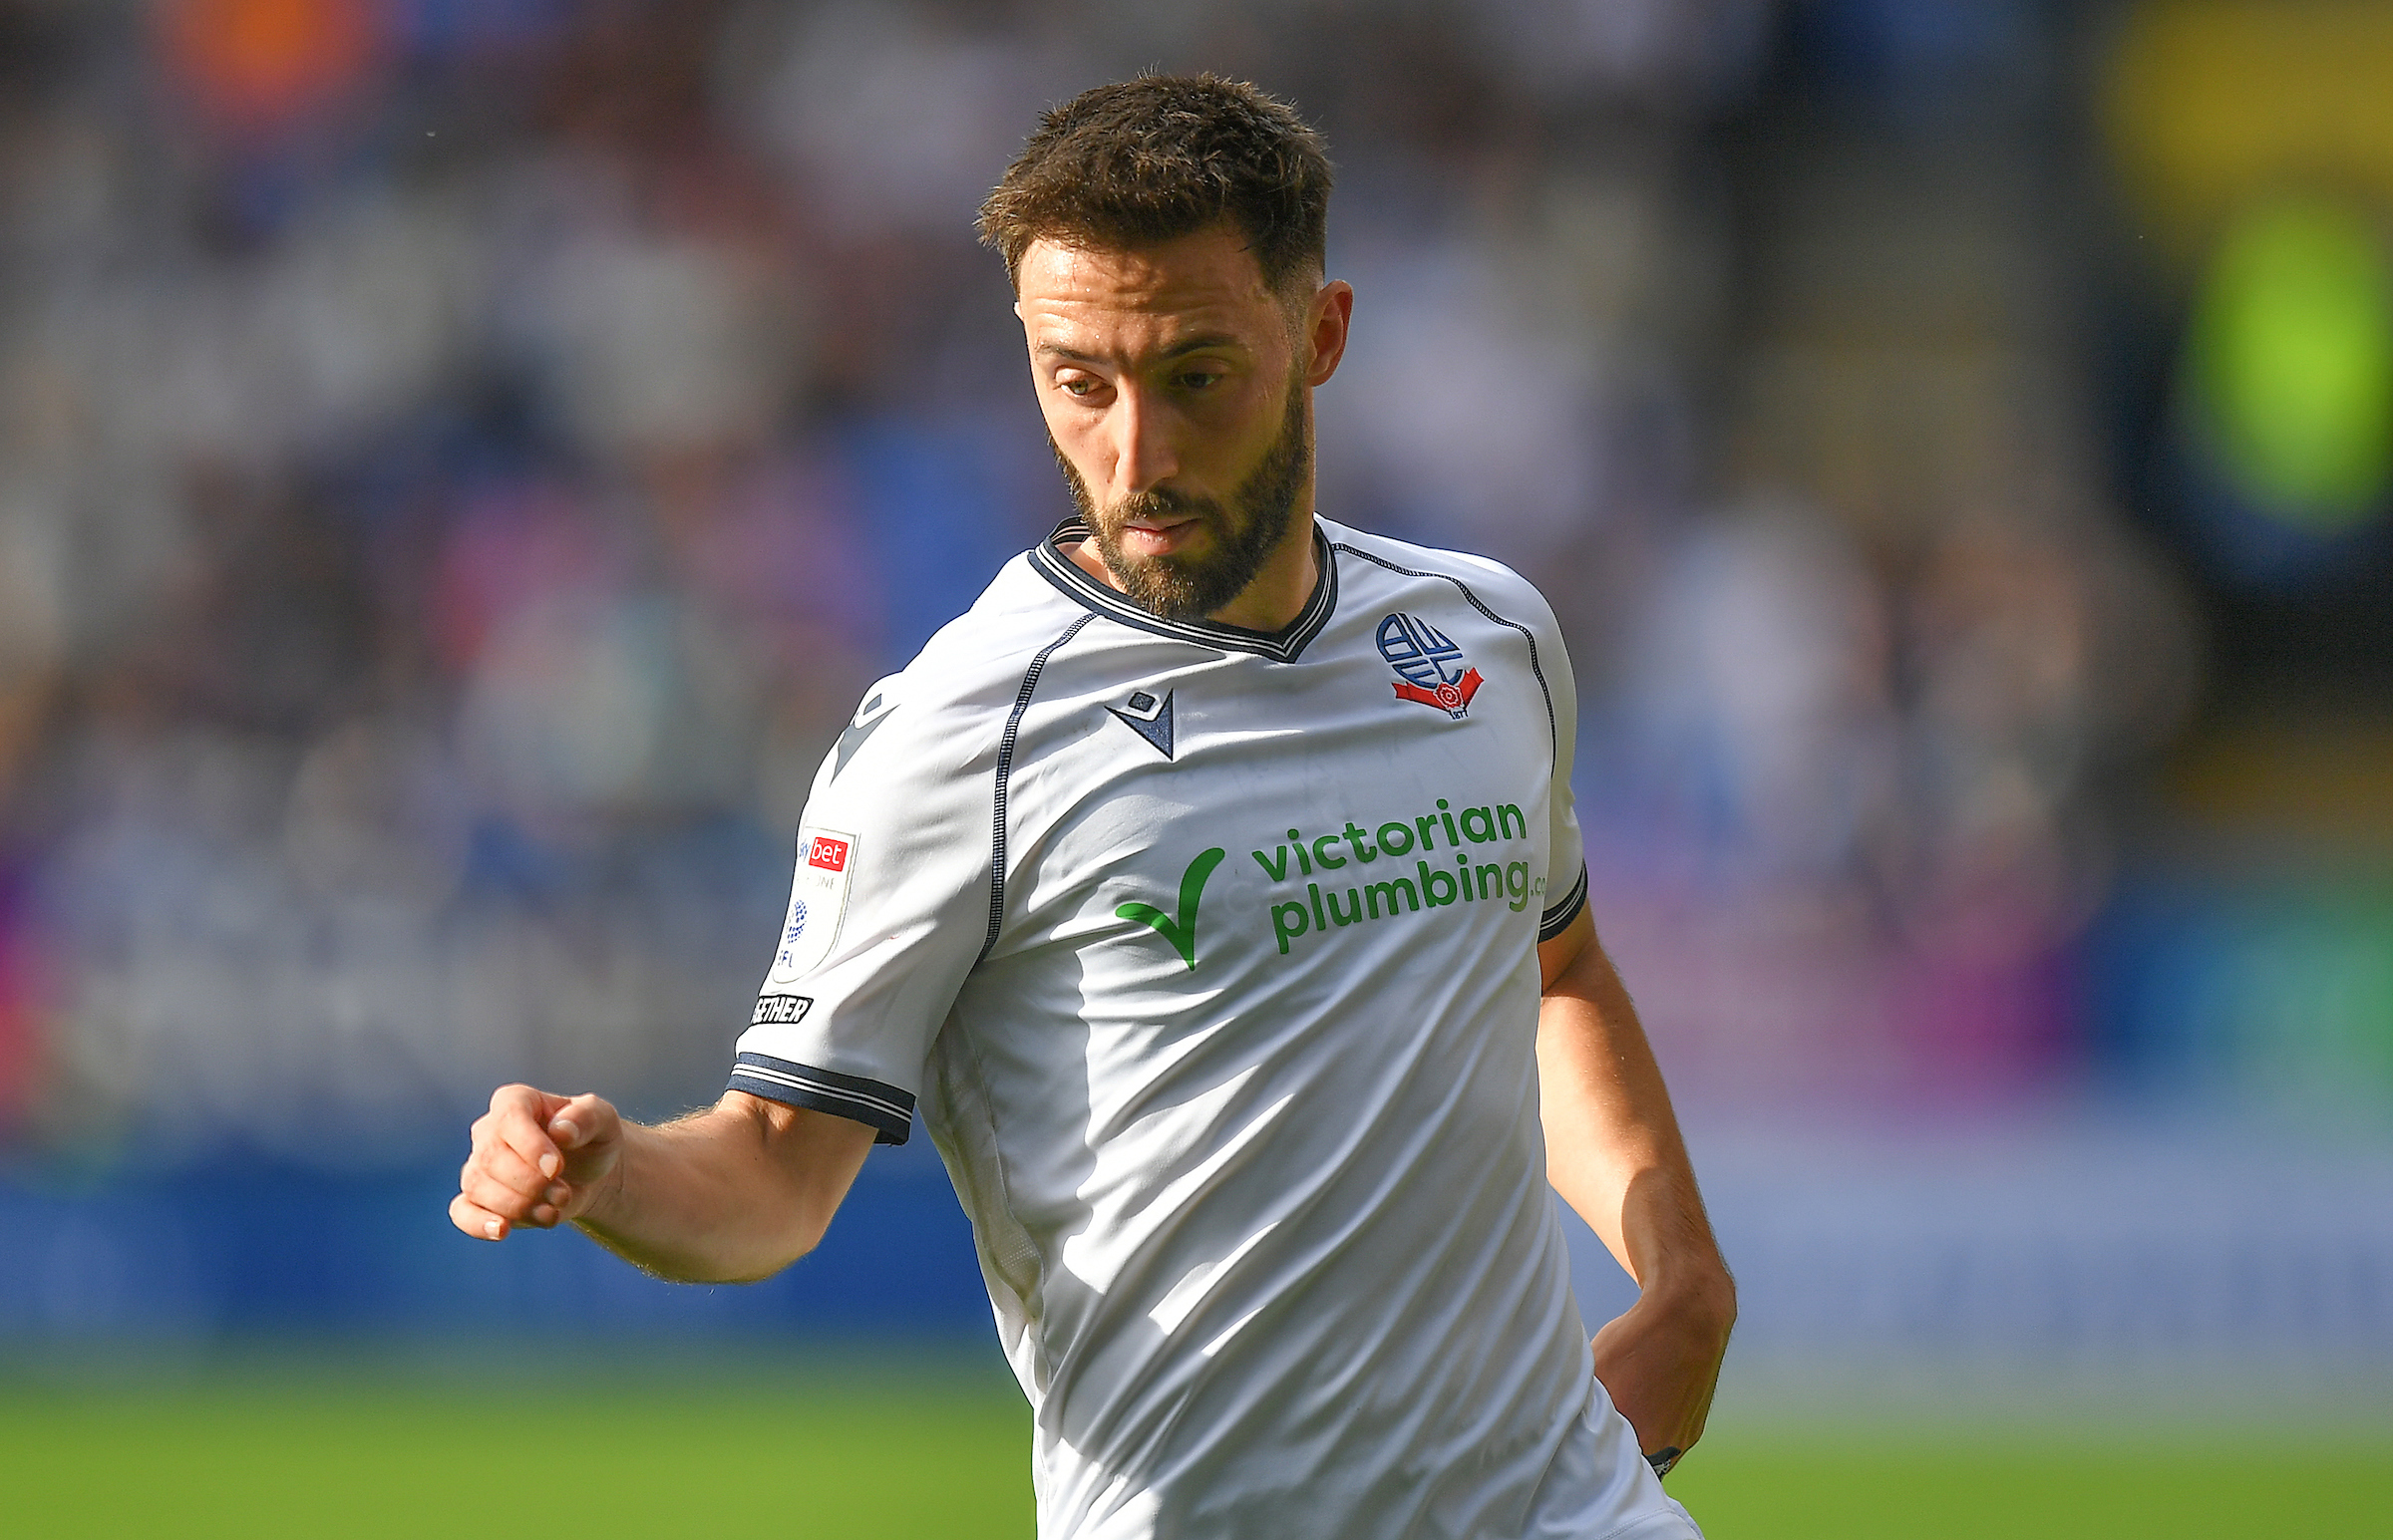 Bolton Wanderers: Evatt and Sheehan up for League One prizes